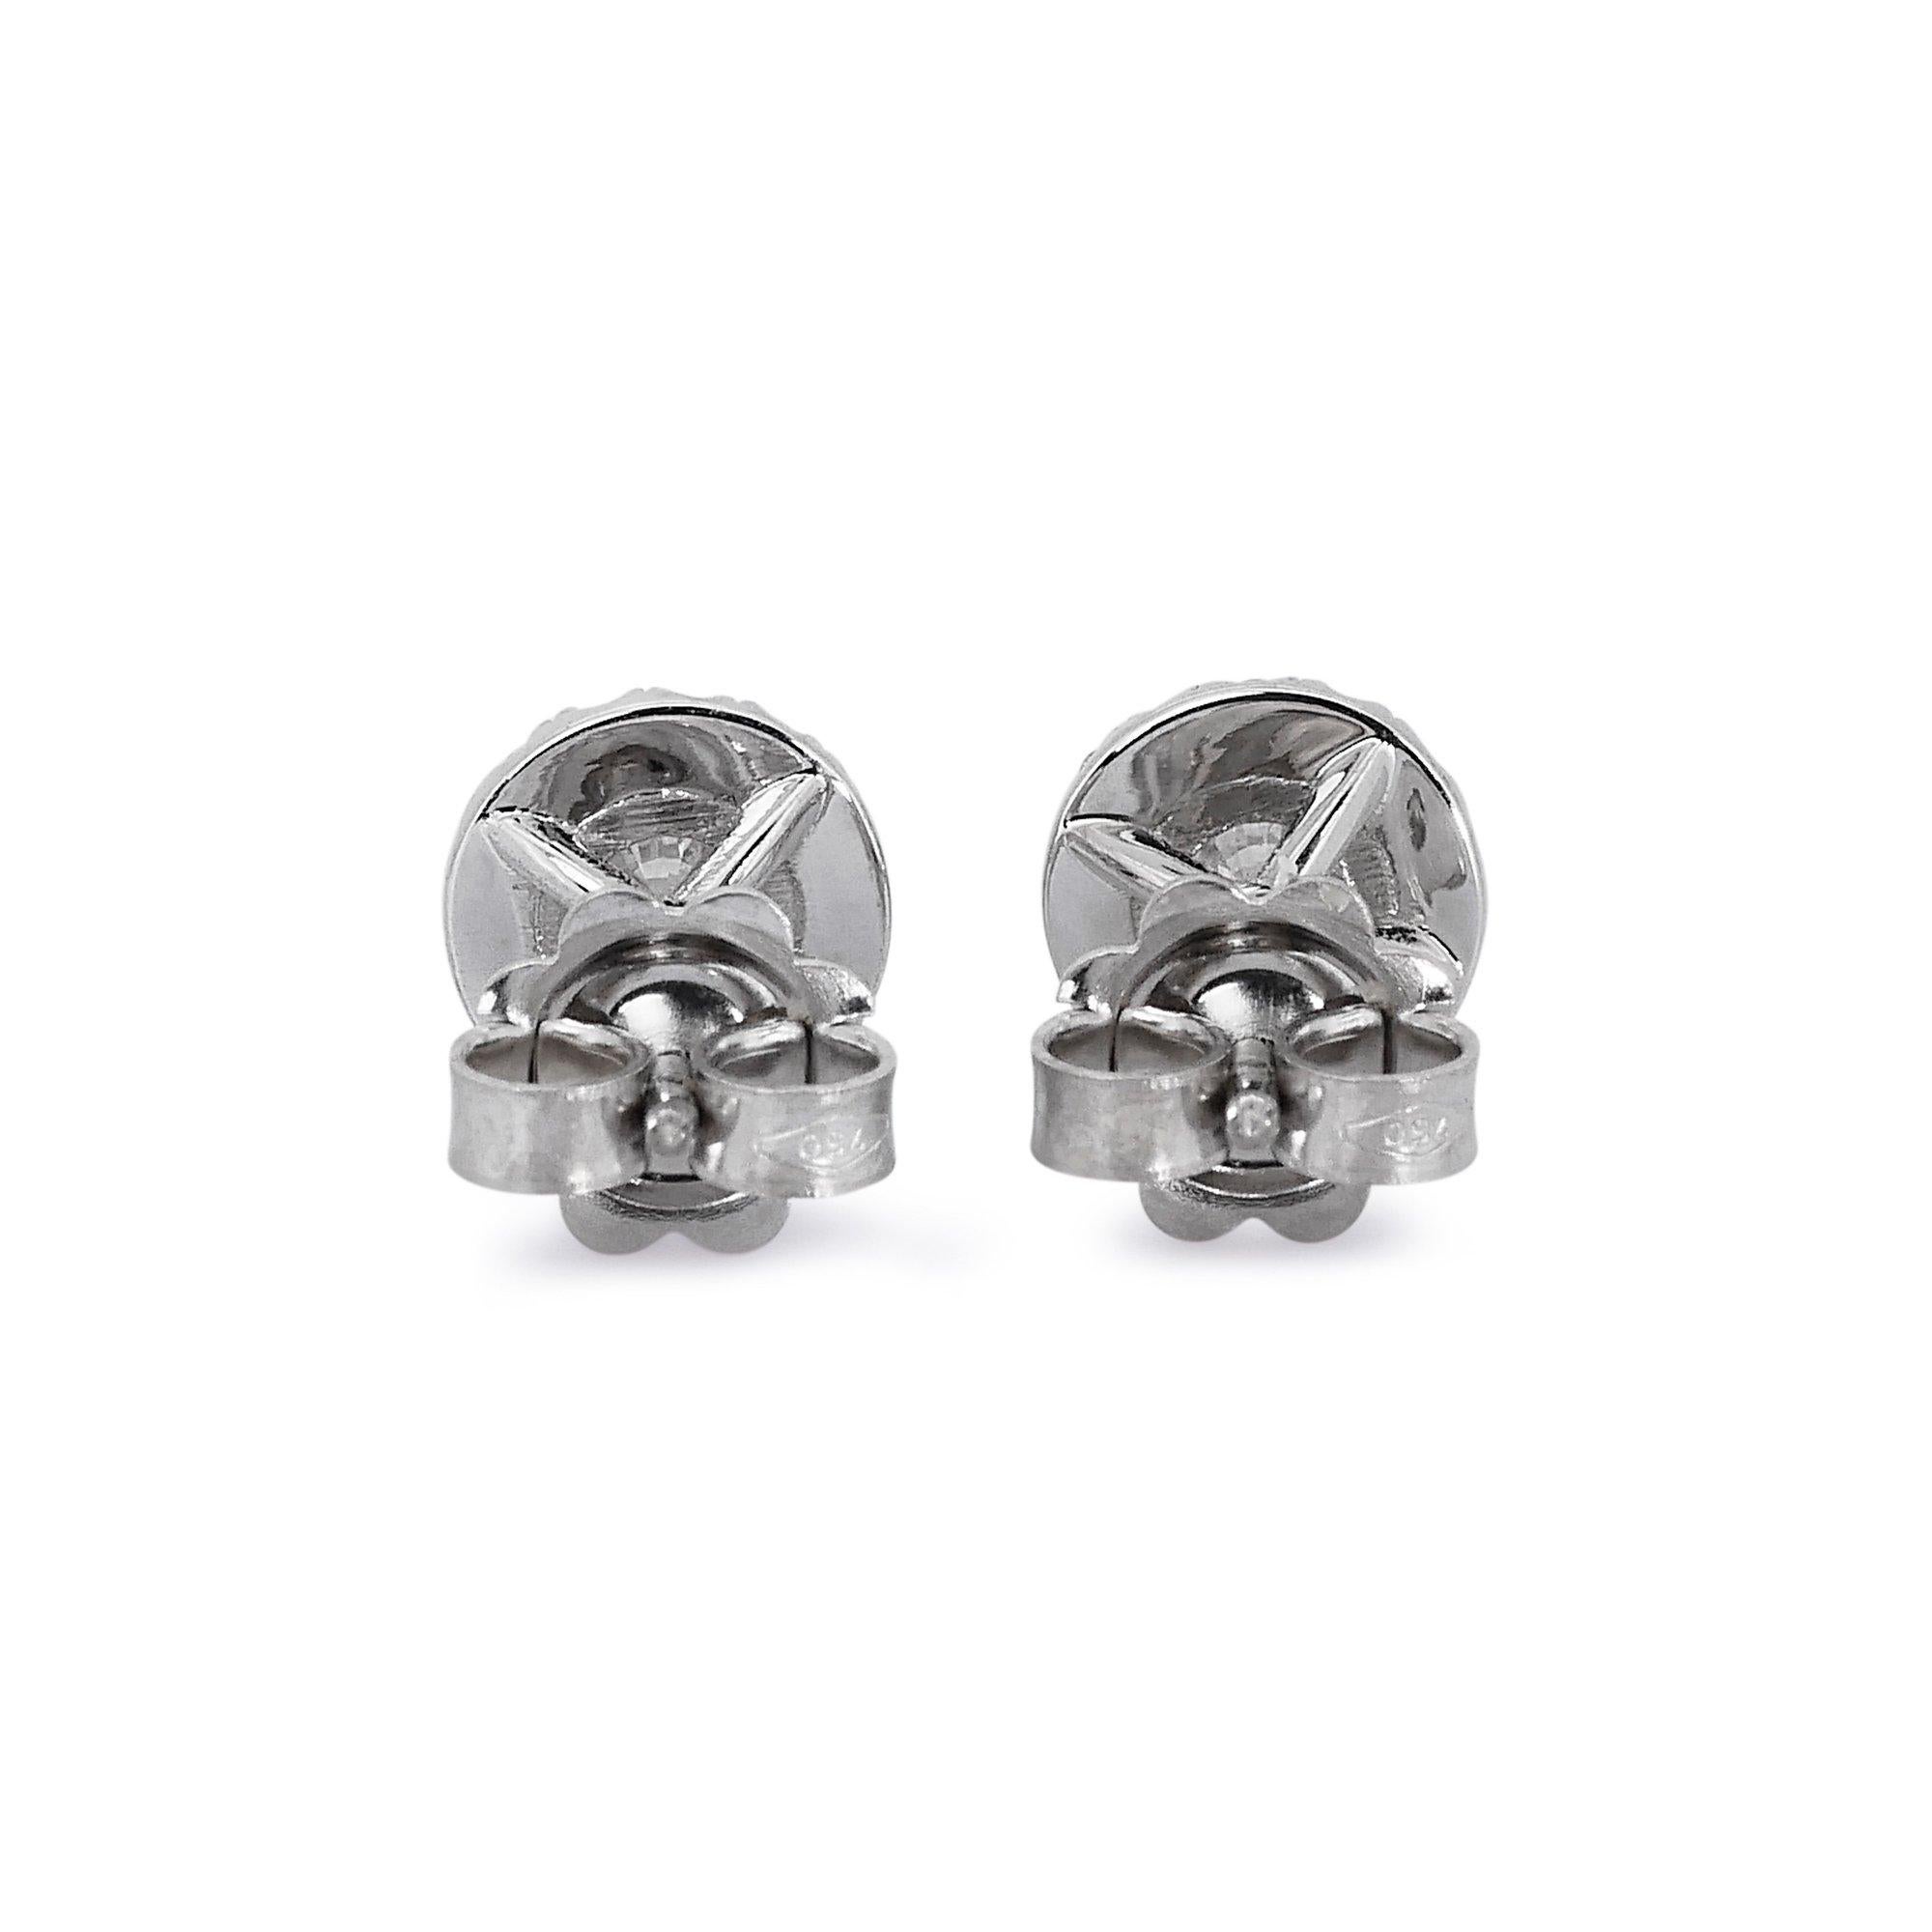 Luxurious 1.24ct Round Diamond Stud Earrings in 18K White Gold - GIA Certified For Sale 2